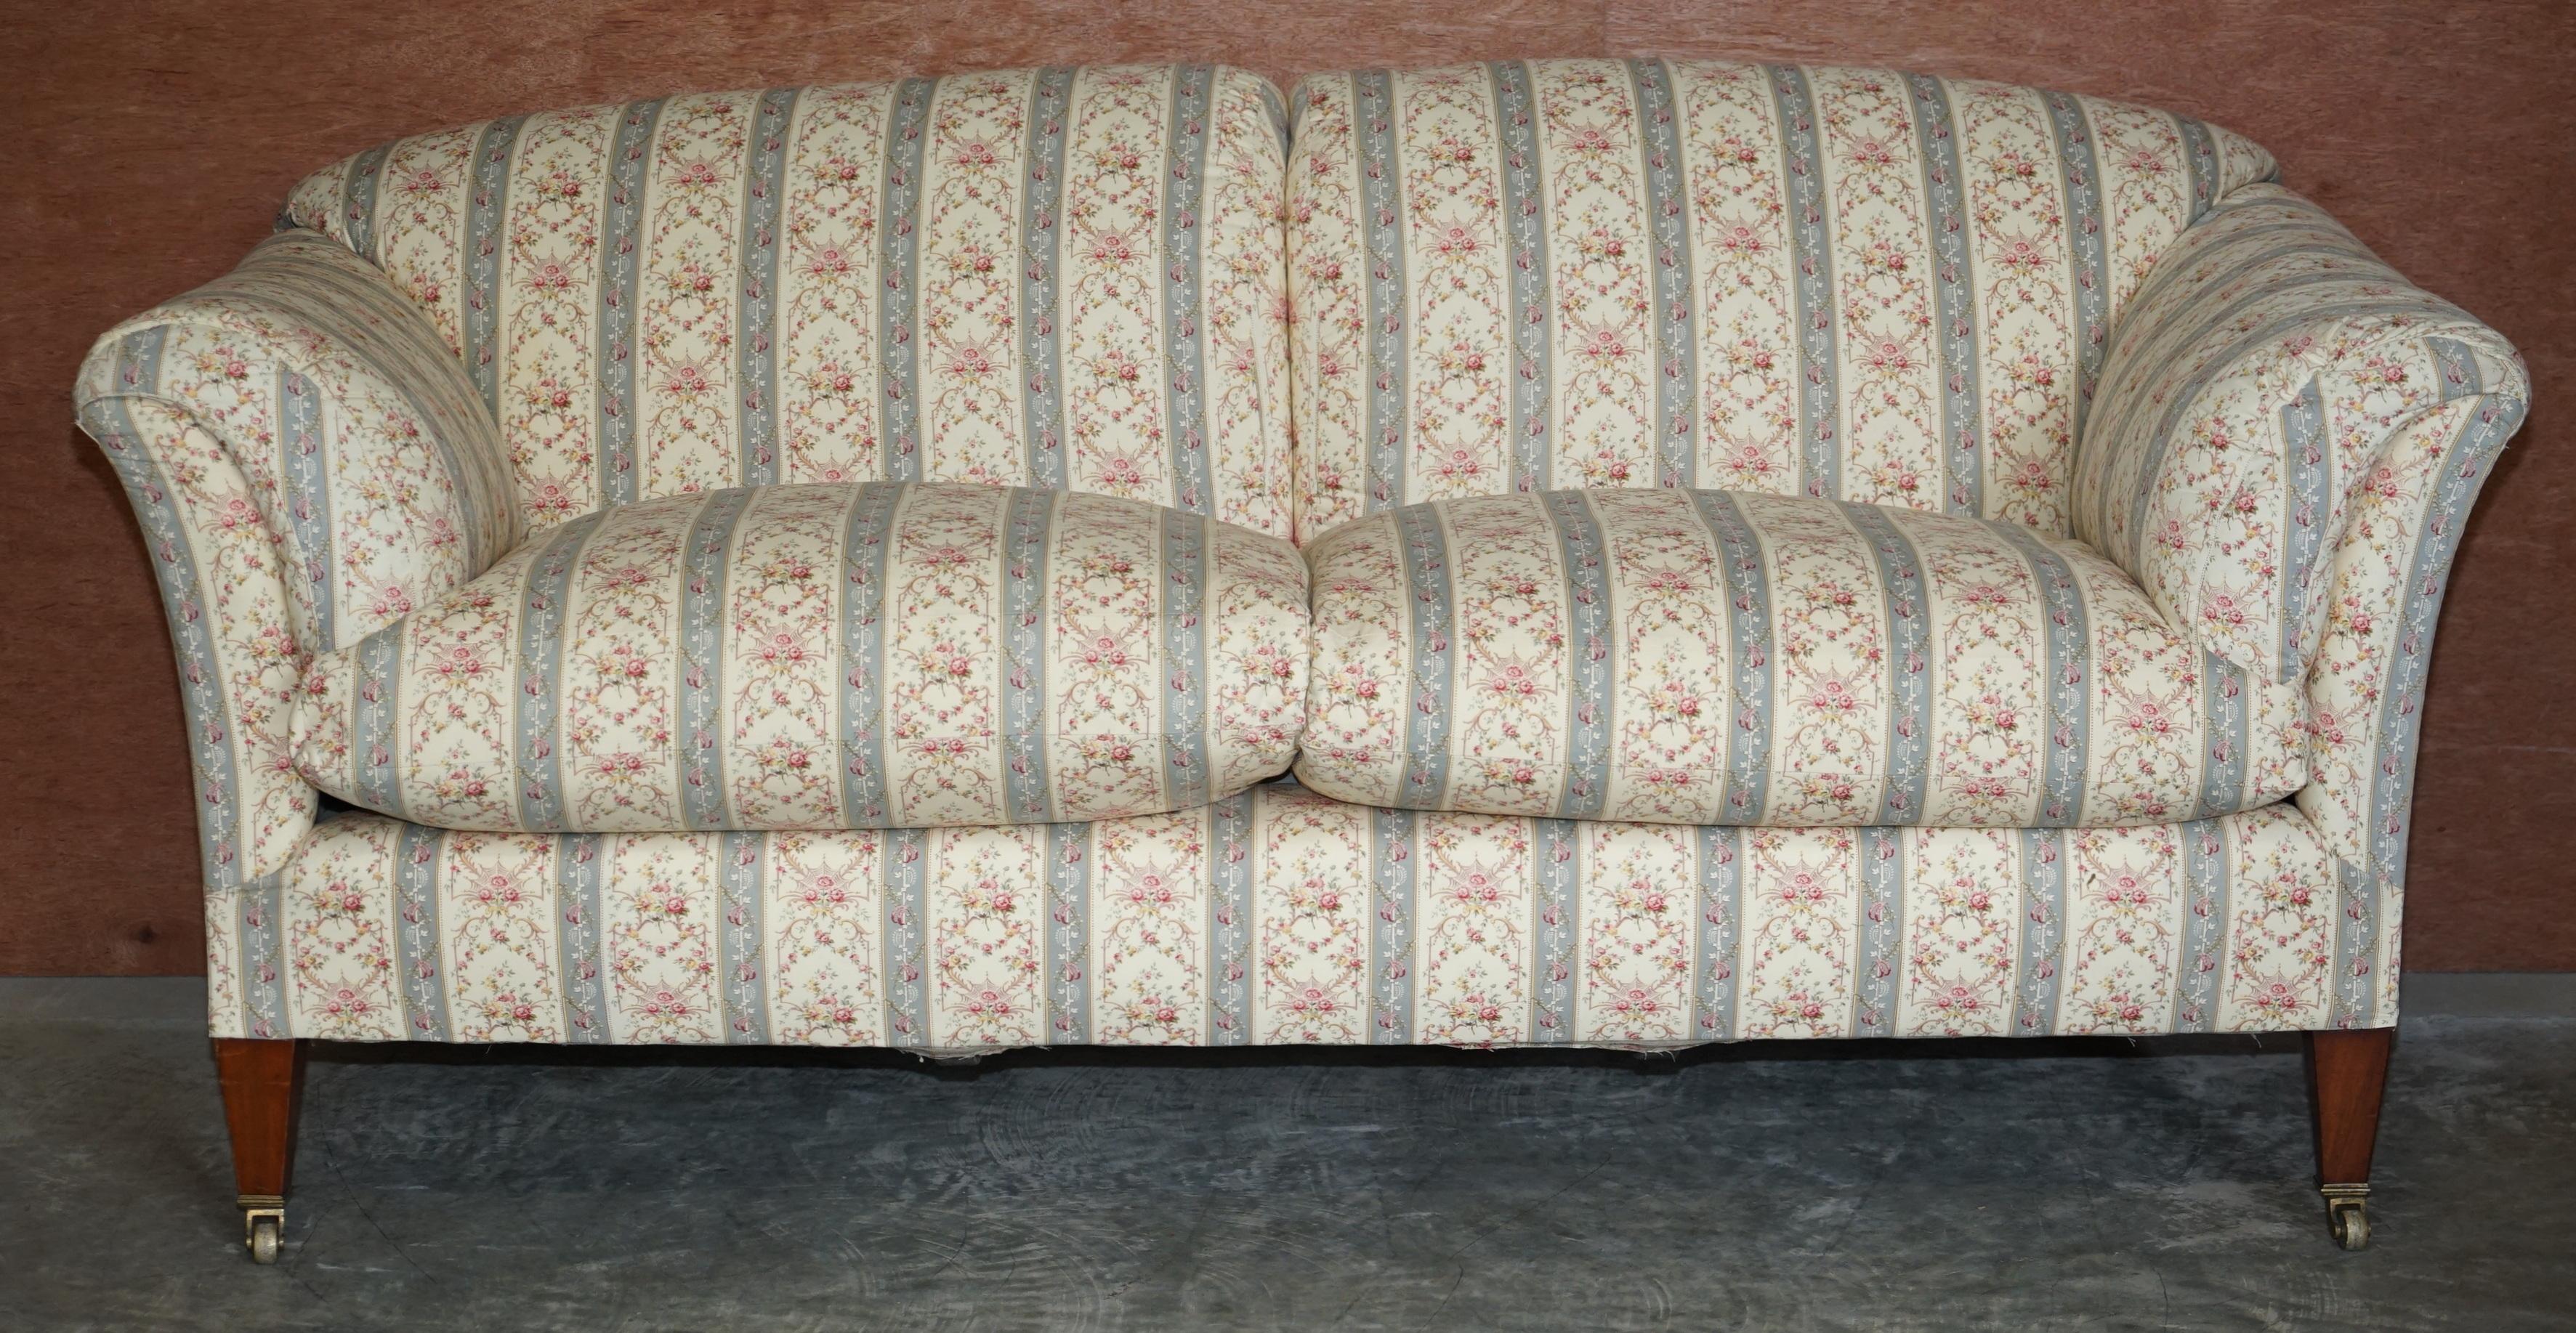 We are delighted to offer this stunning exceptionally rare and original Howard & Son's circa 1910-1920 Portarlington three seat large sofa with duvet padded arms and feather and fibre filled cushions 

This is simply put the most comfortable sofa in